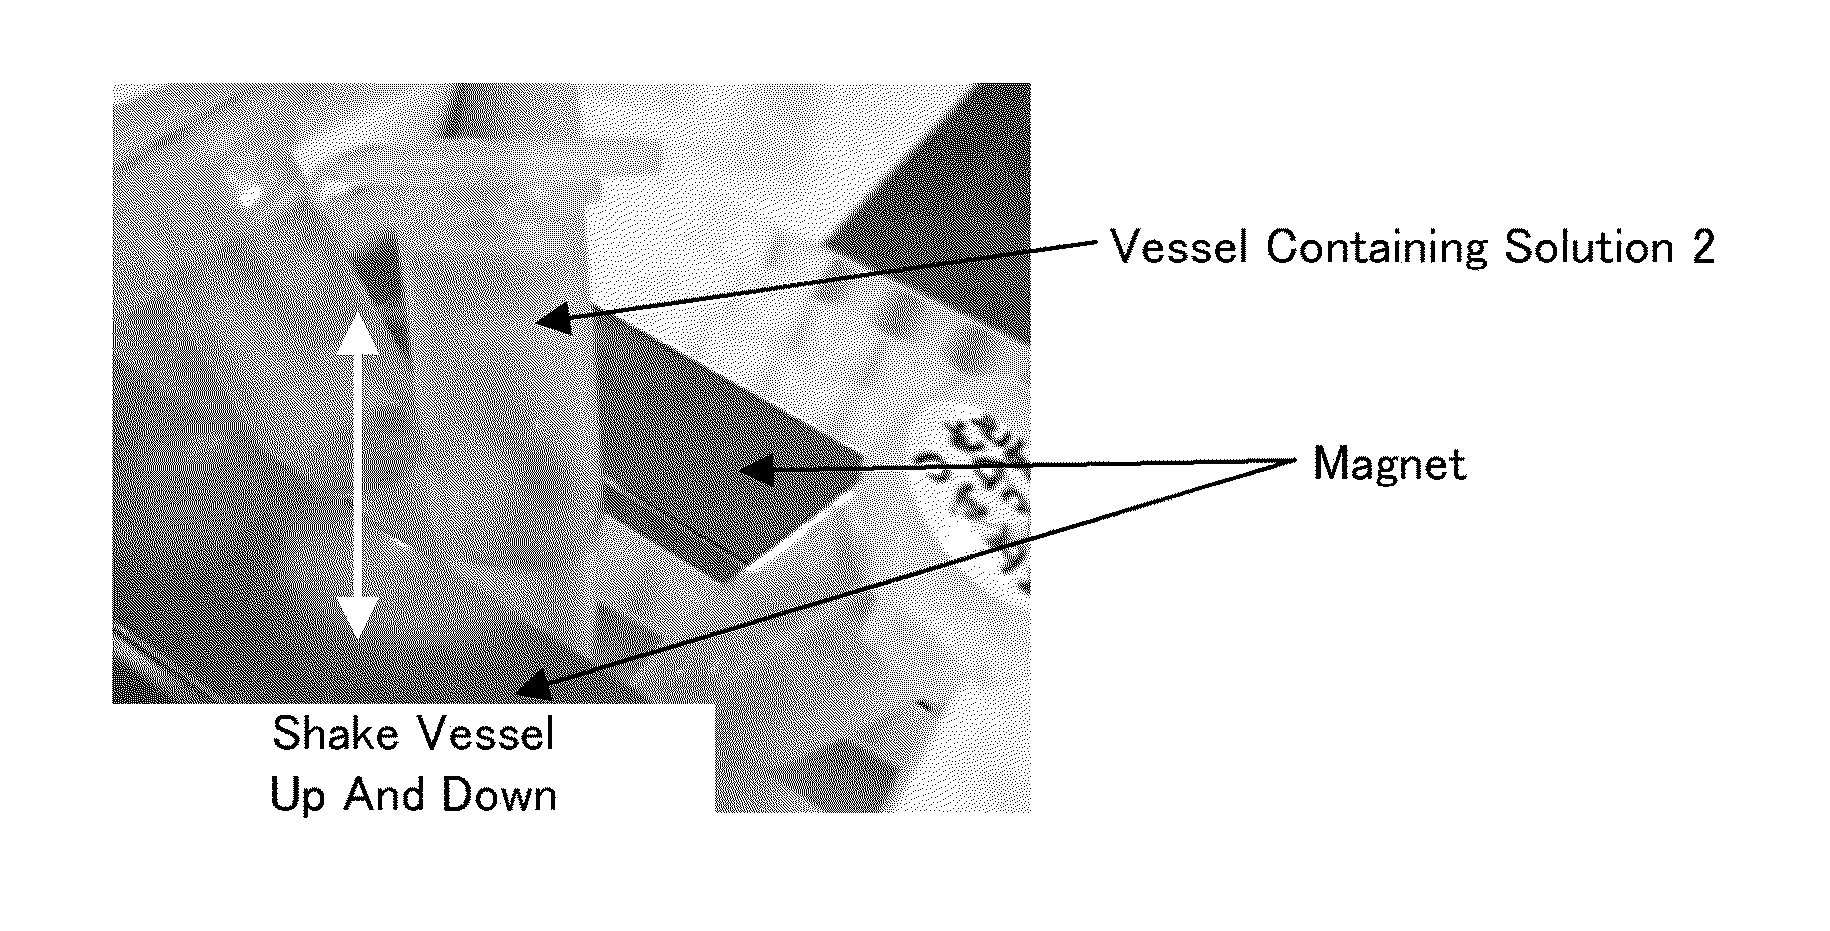 Method for concentrating viruses, method for concentrating cells or bacteria, and magnetic composite